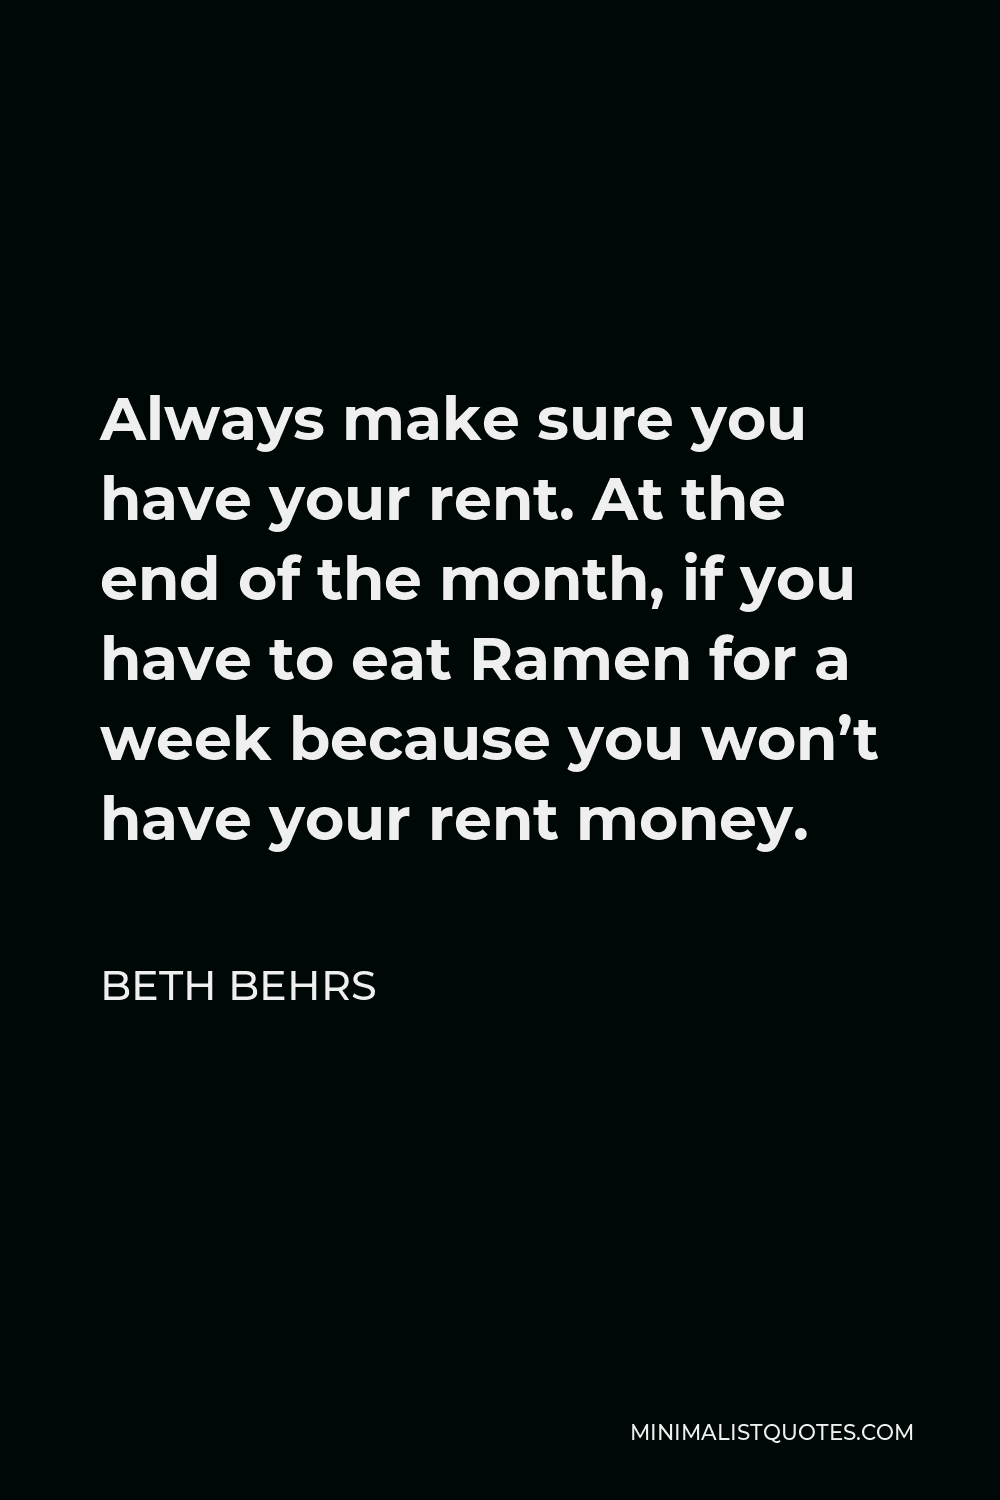 Beth Behrs Quote - Always make sure you have your rent. At the end of the month, if you have to eat Ramen for a week because you won’t have your rent money.